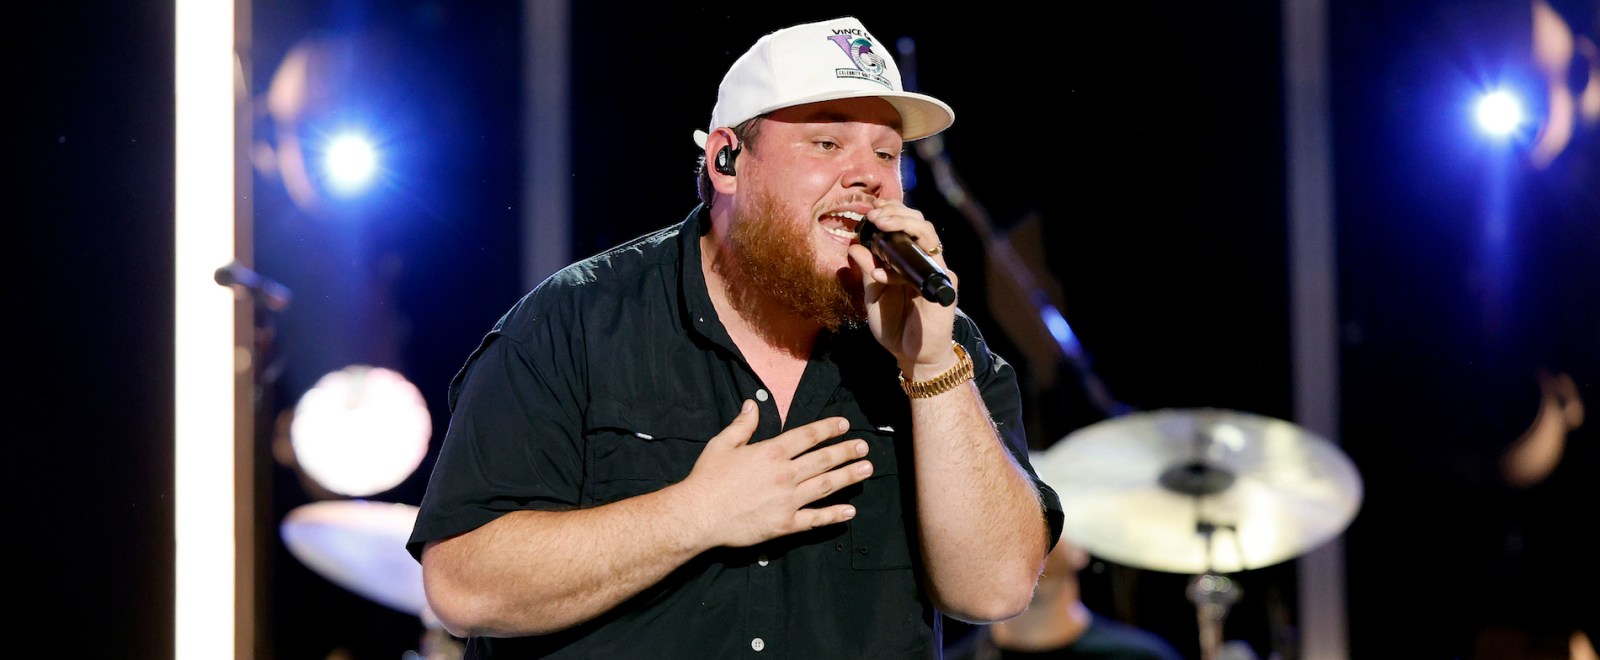 Luke Combs Got So Upset About The Brian Burns Trade That He Tweeted ‘WHAT ARE WE DOING?!?!?’ At The Panthers